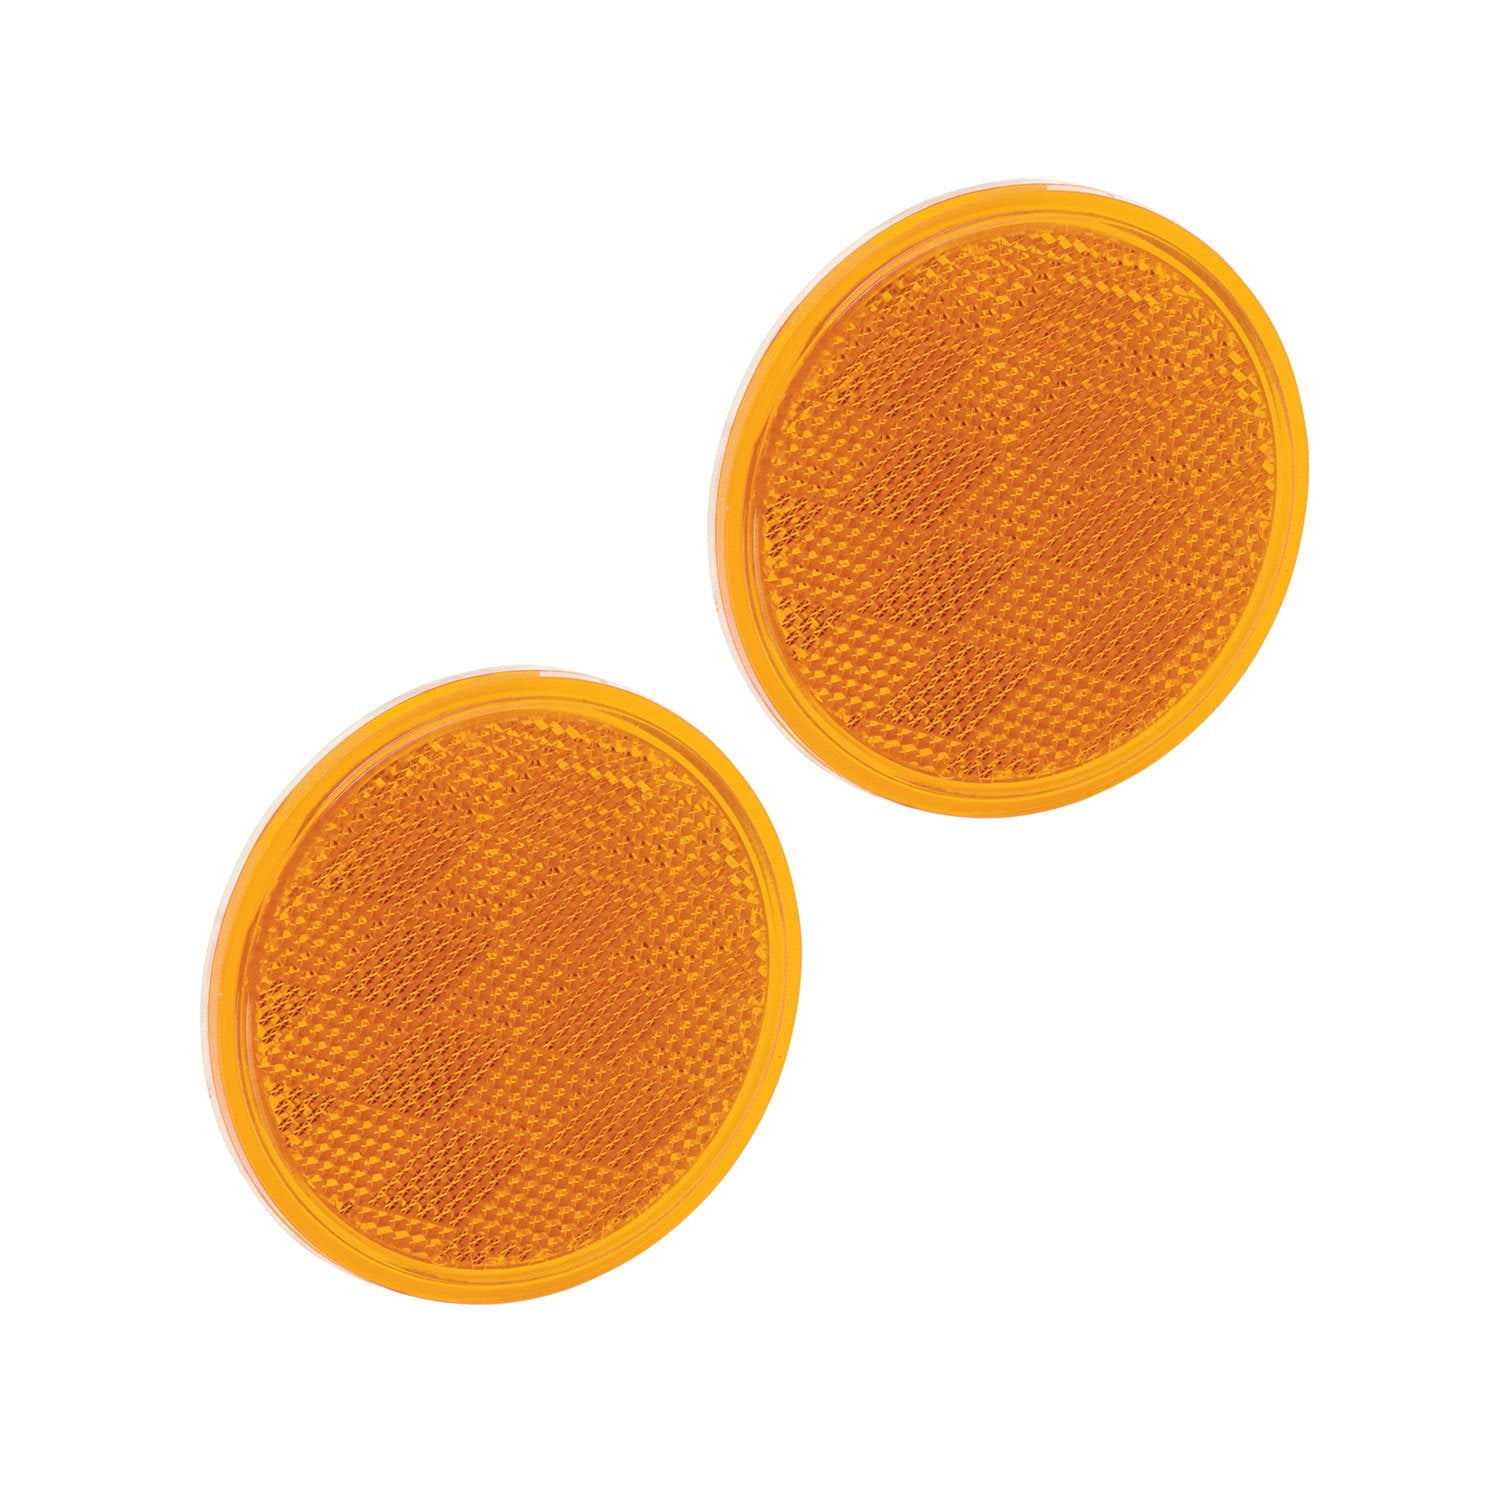 Bargman | 74-38-020 | Reflector (Class A 3-3/16" Round Amber with Adhesive Back - 2 Pack)